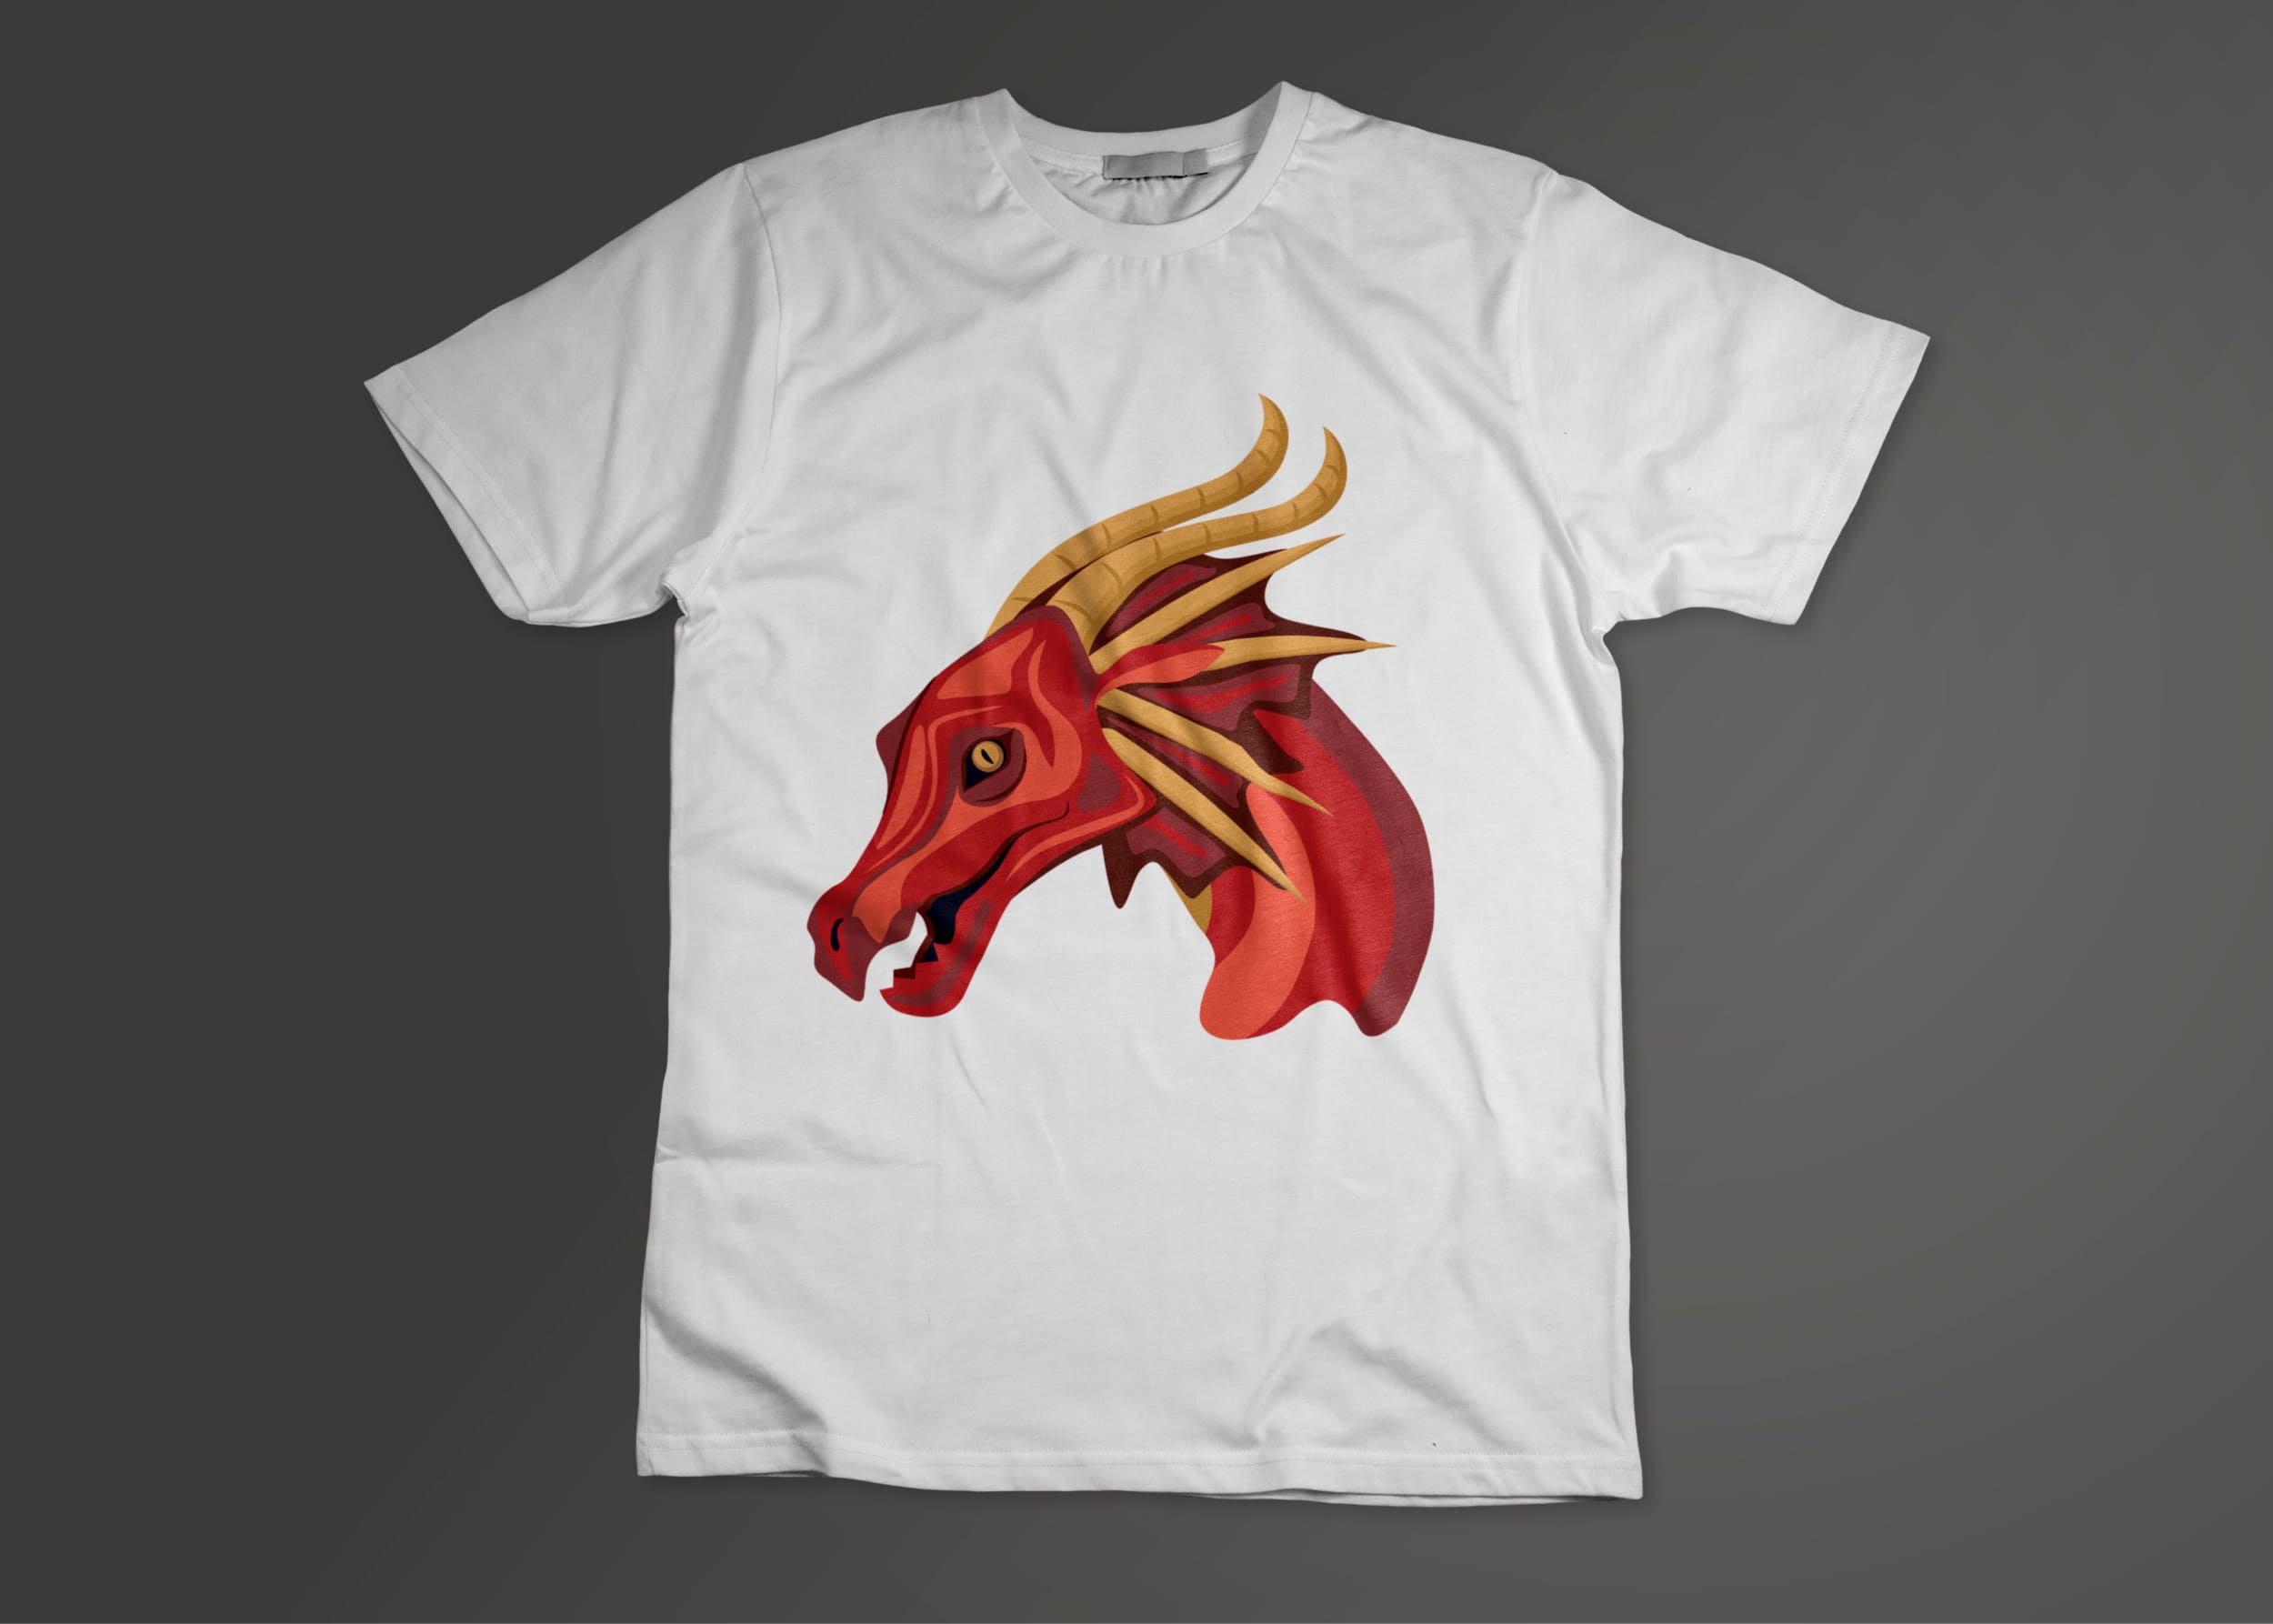 White T-shirt with a red dragon head on a dark gray background.